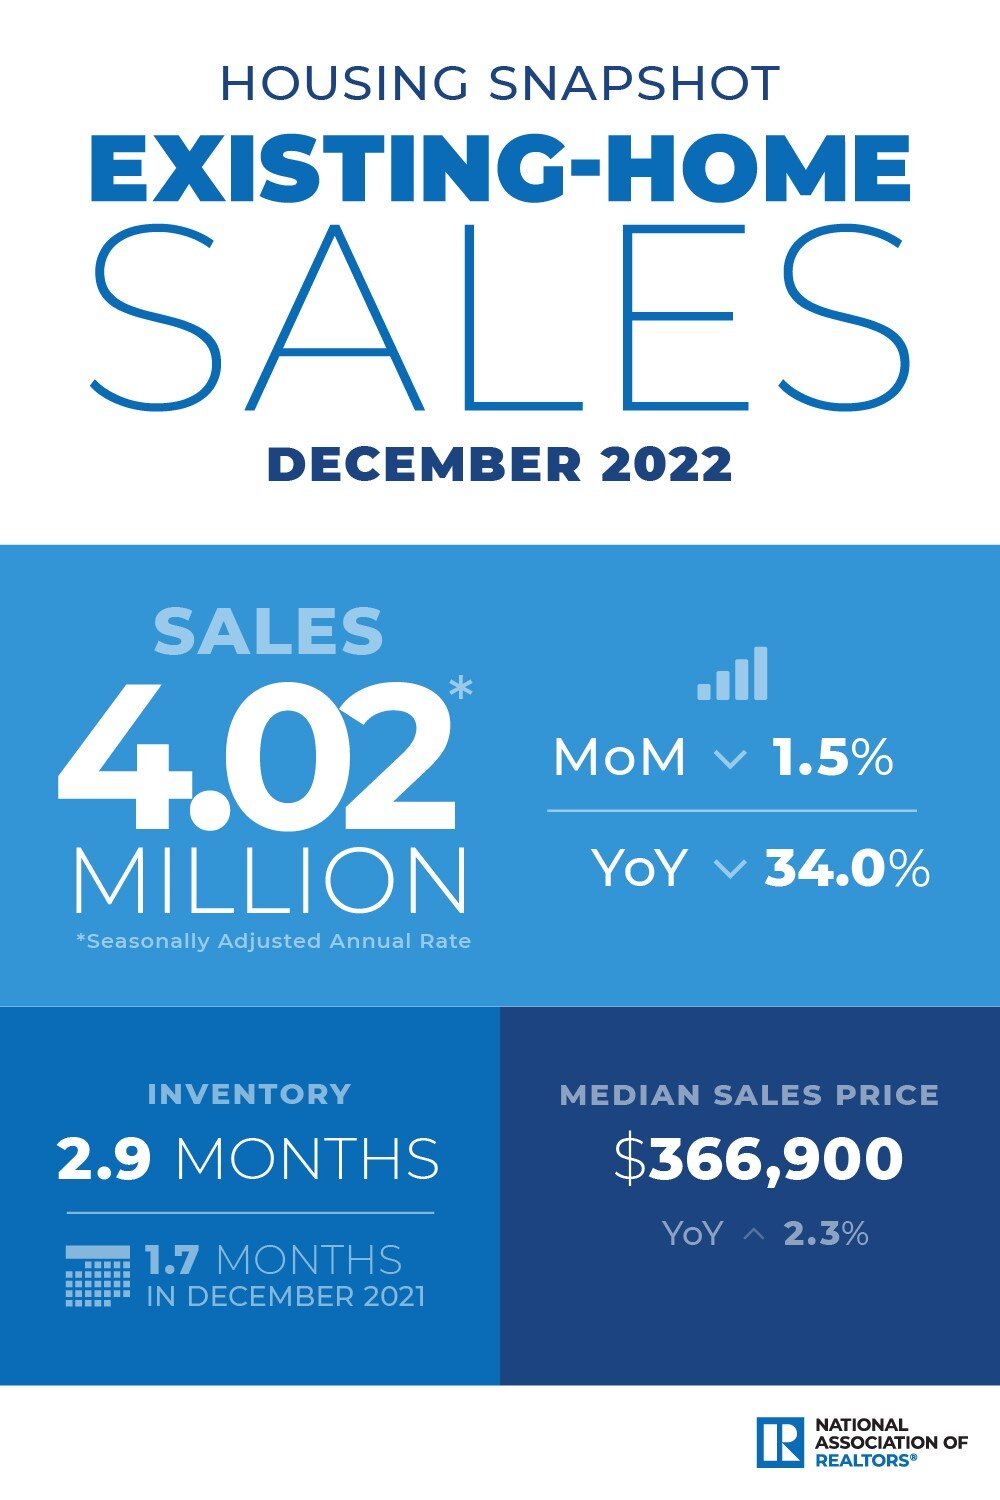 https://www.worldpropertyjournal.com/news-assets-2/2022-12-existing-home-sales-housing-snapshot-infographic.jpg